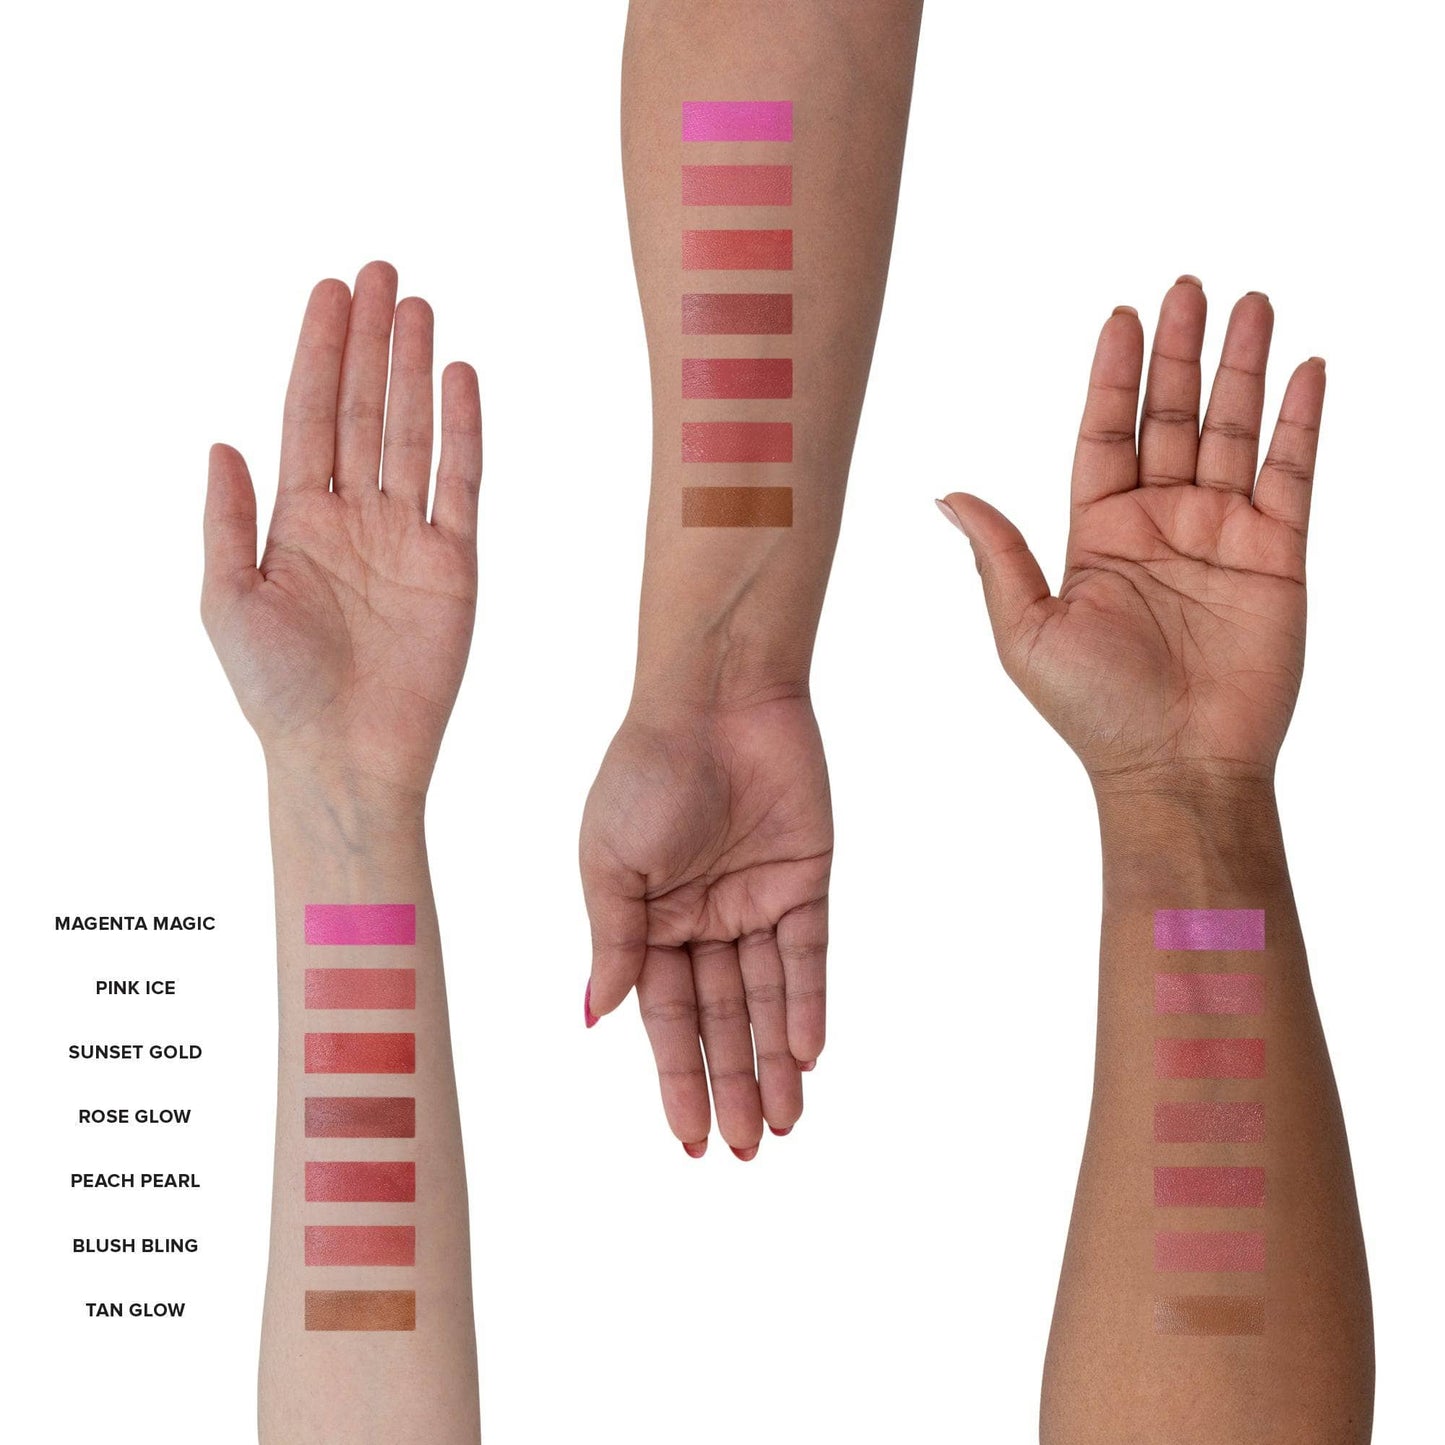 Rose Glow swatches